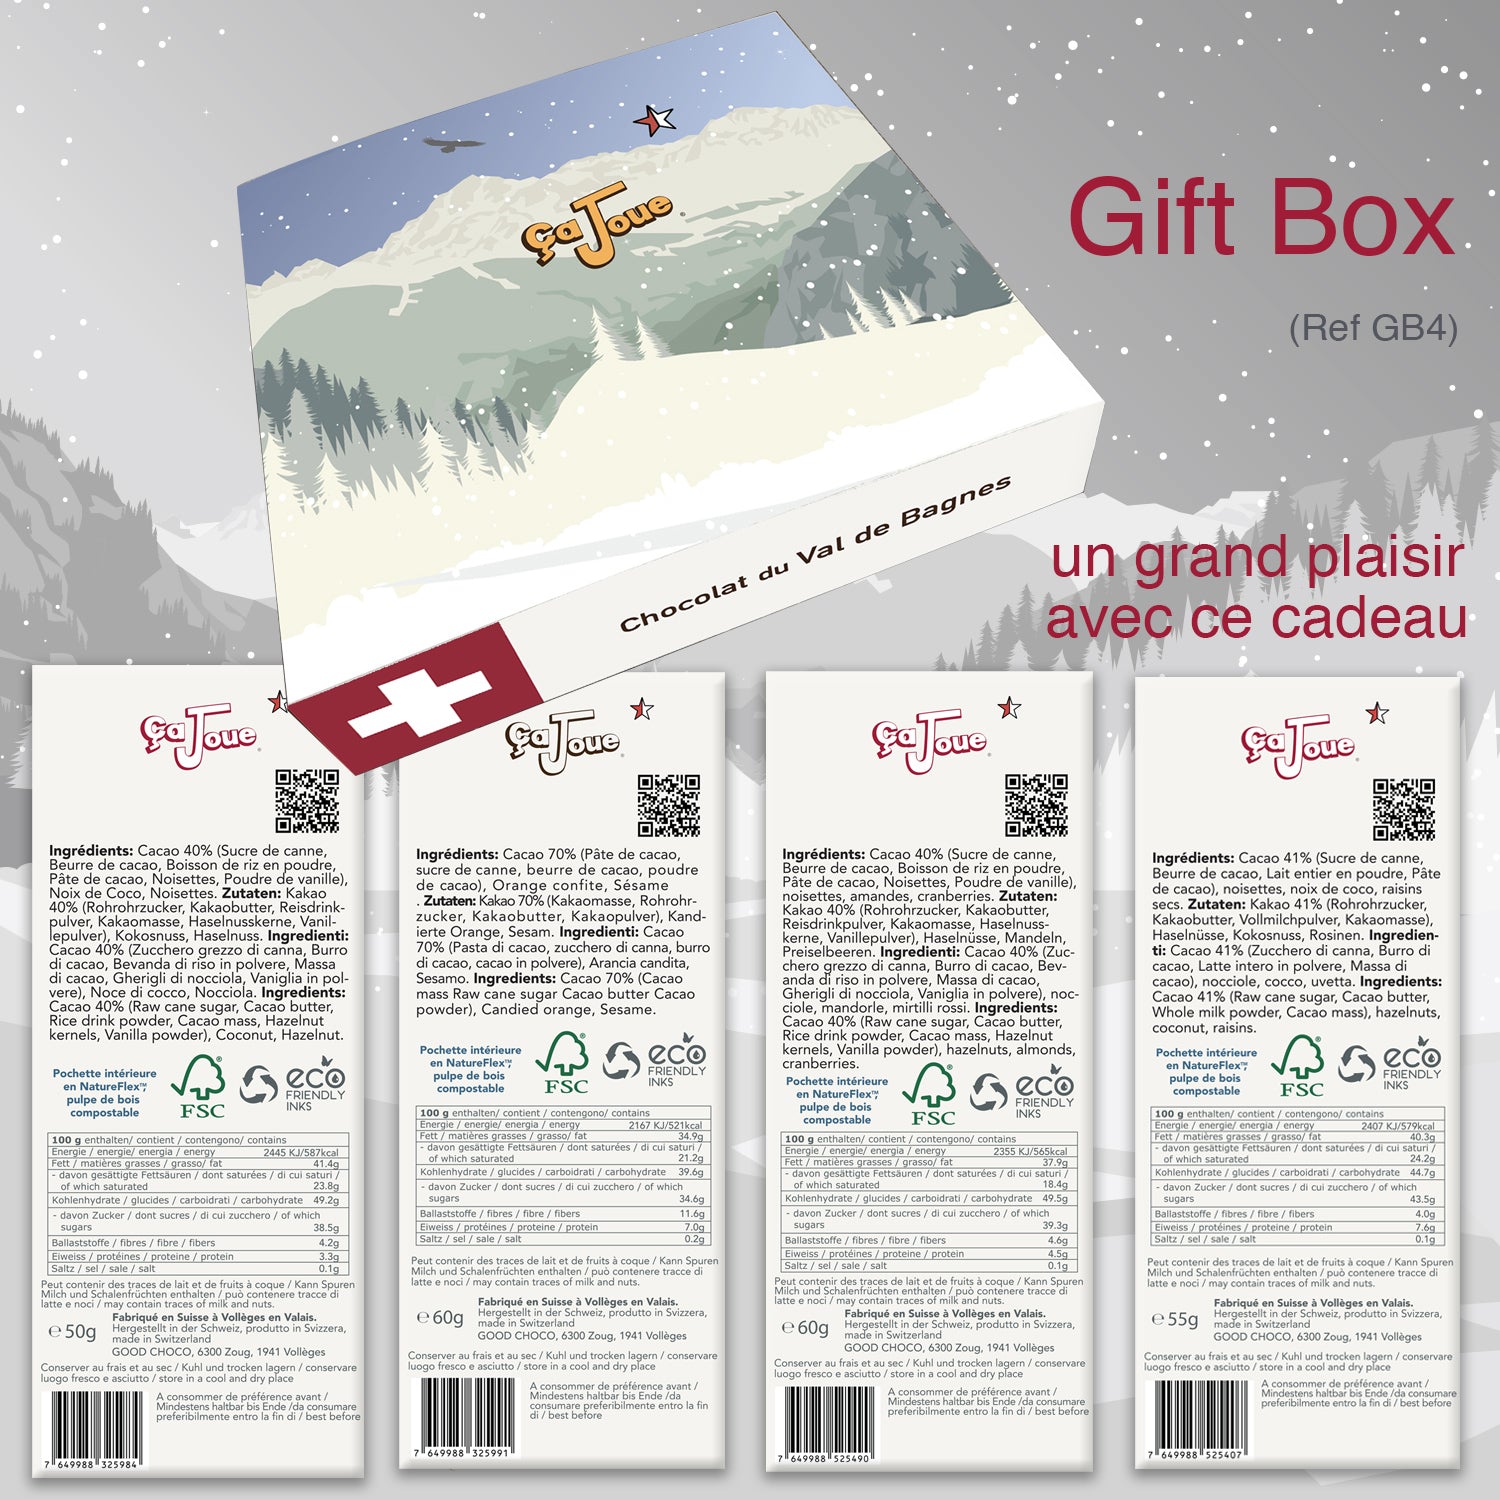 Gift Box (Ref GB4) Chocolate from Val de Bagnes